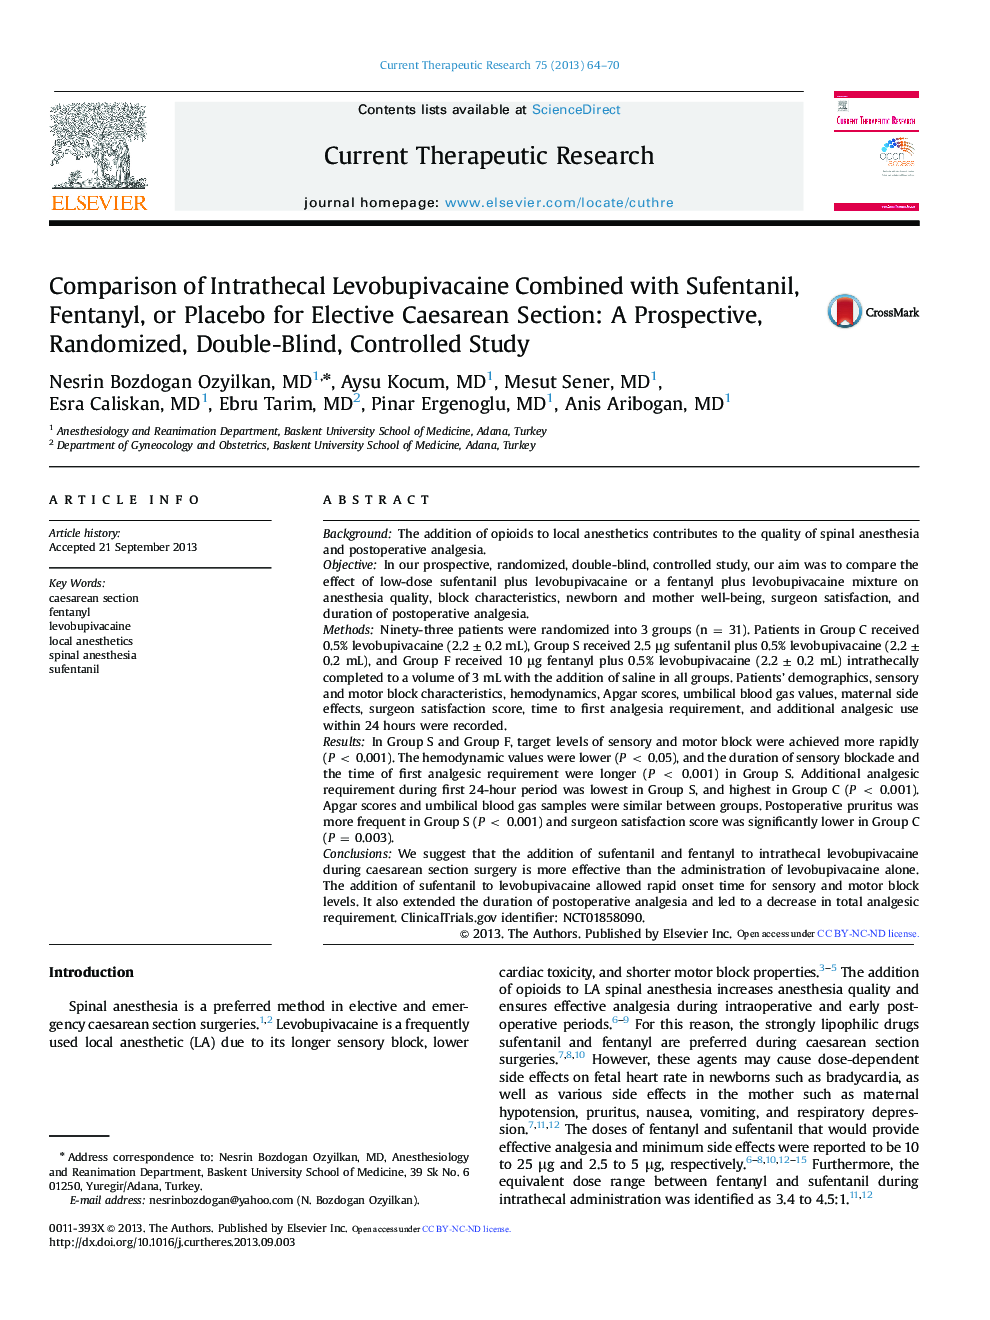 Comparison of Intrathecal Levobupivacaine Combined with Sufentanil, Fentanyl, or Placebo for Elective Caesarean Section: A Prospective, Randomized, Double-Blind, Controlled Study